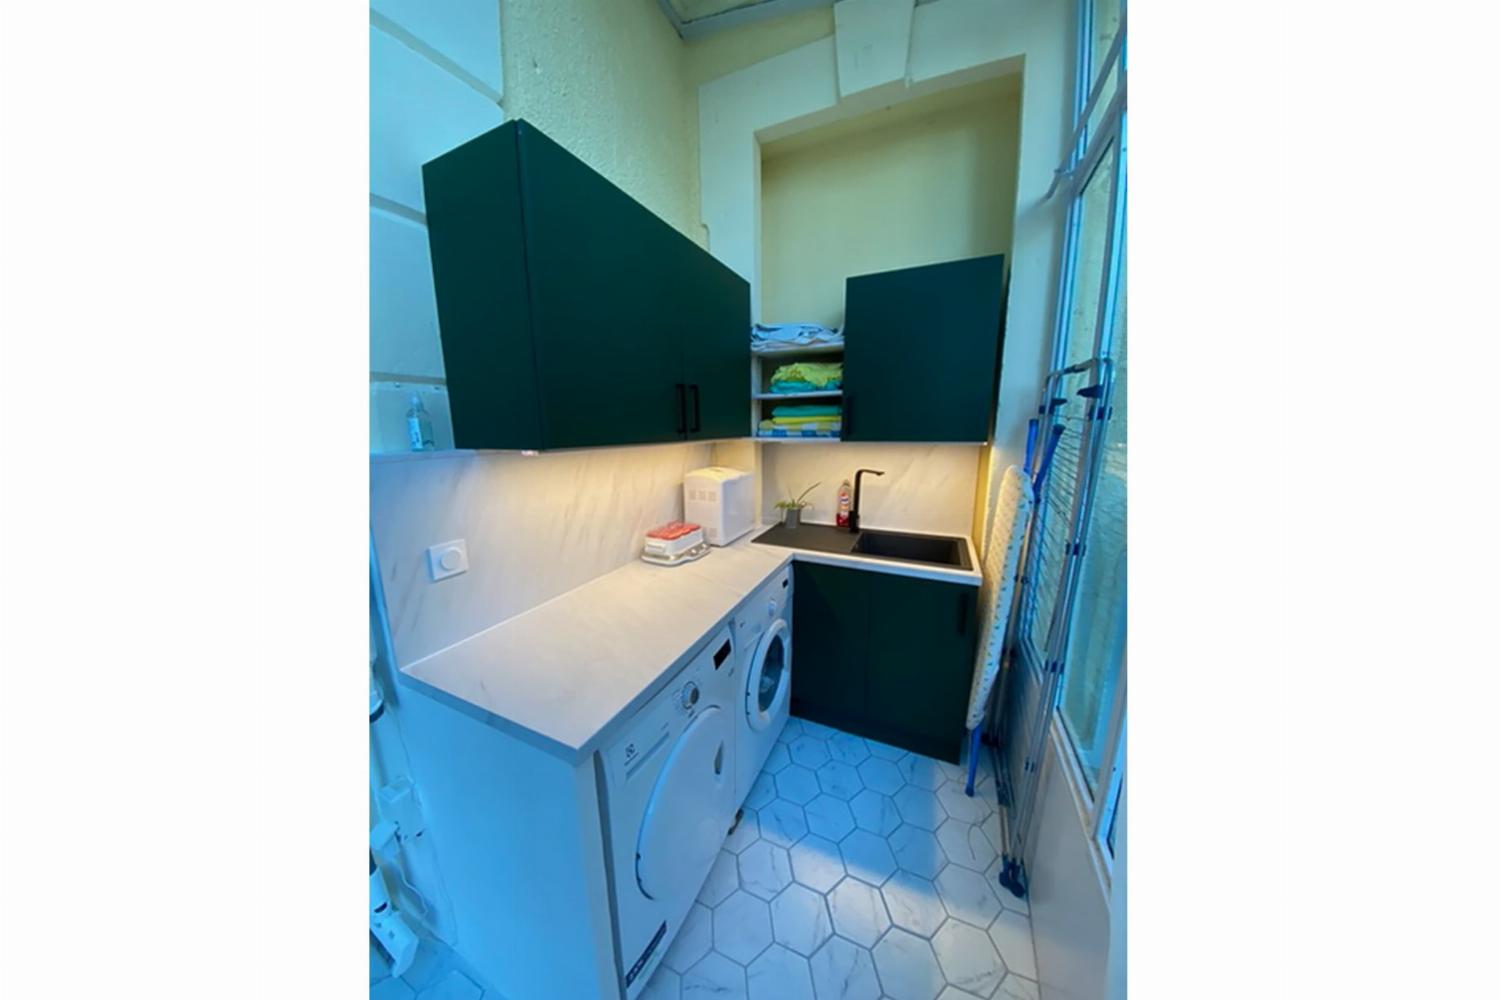 Utility room | Rental home in South of France